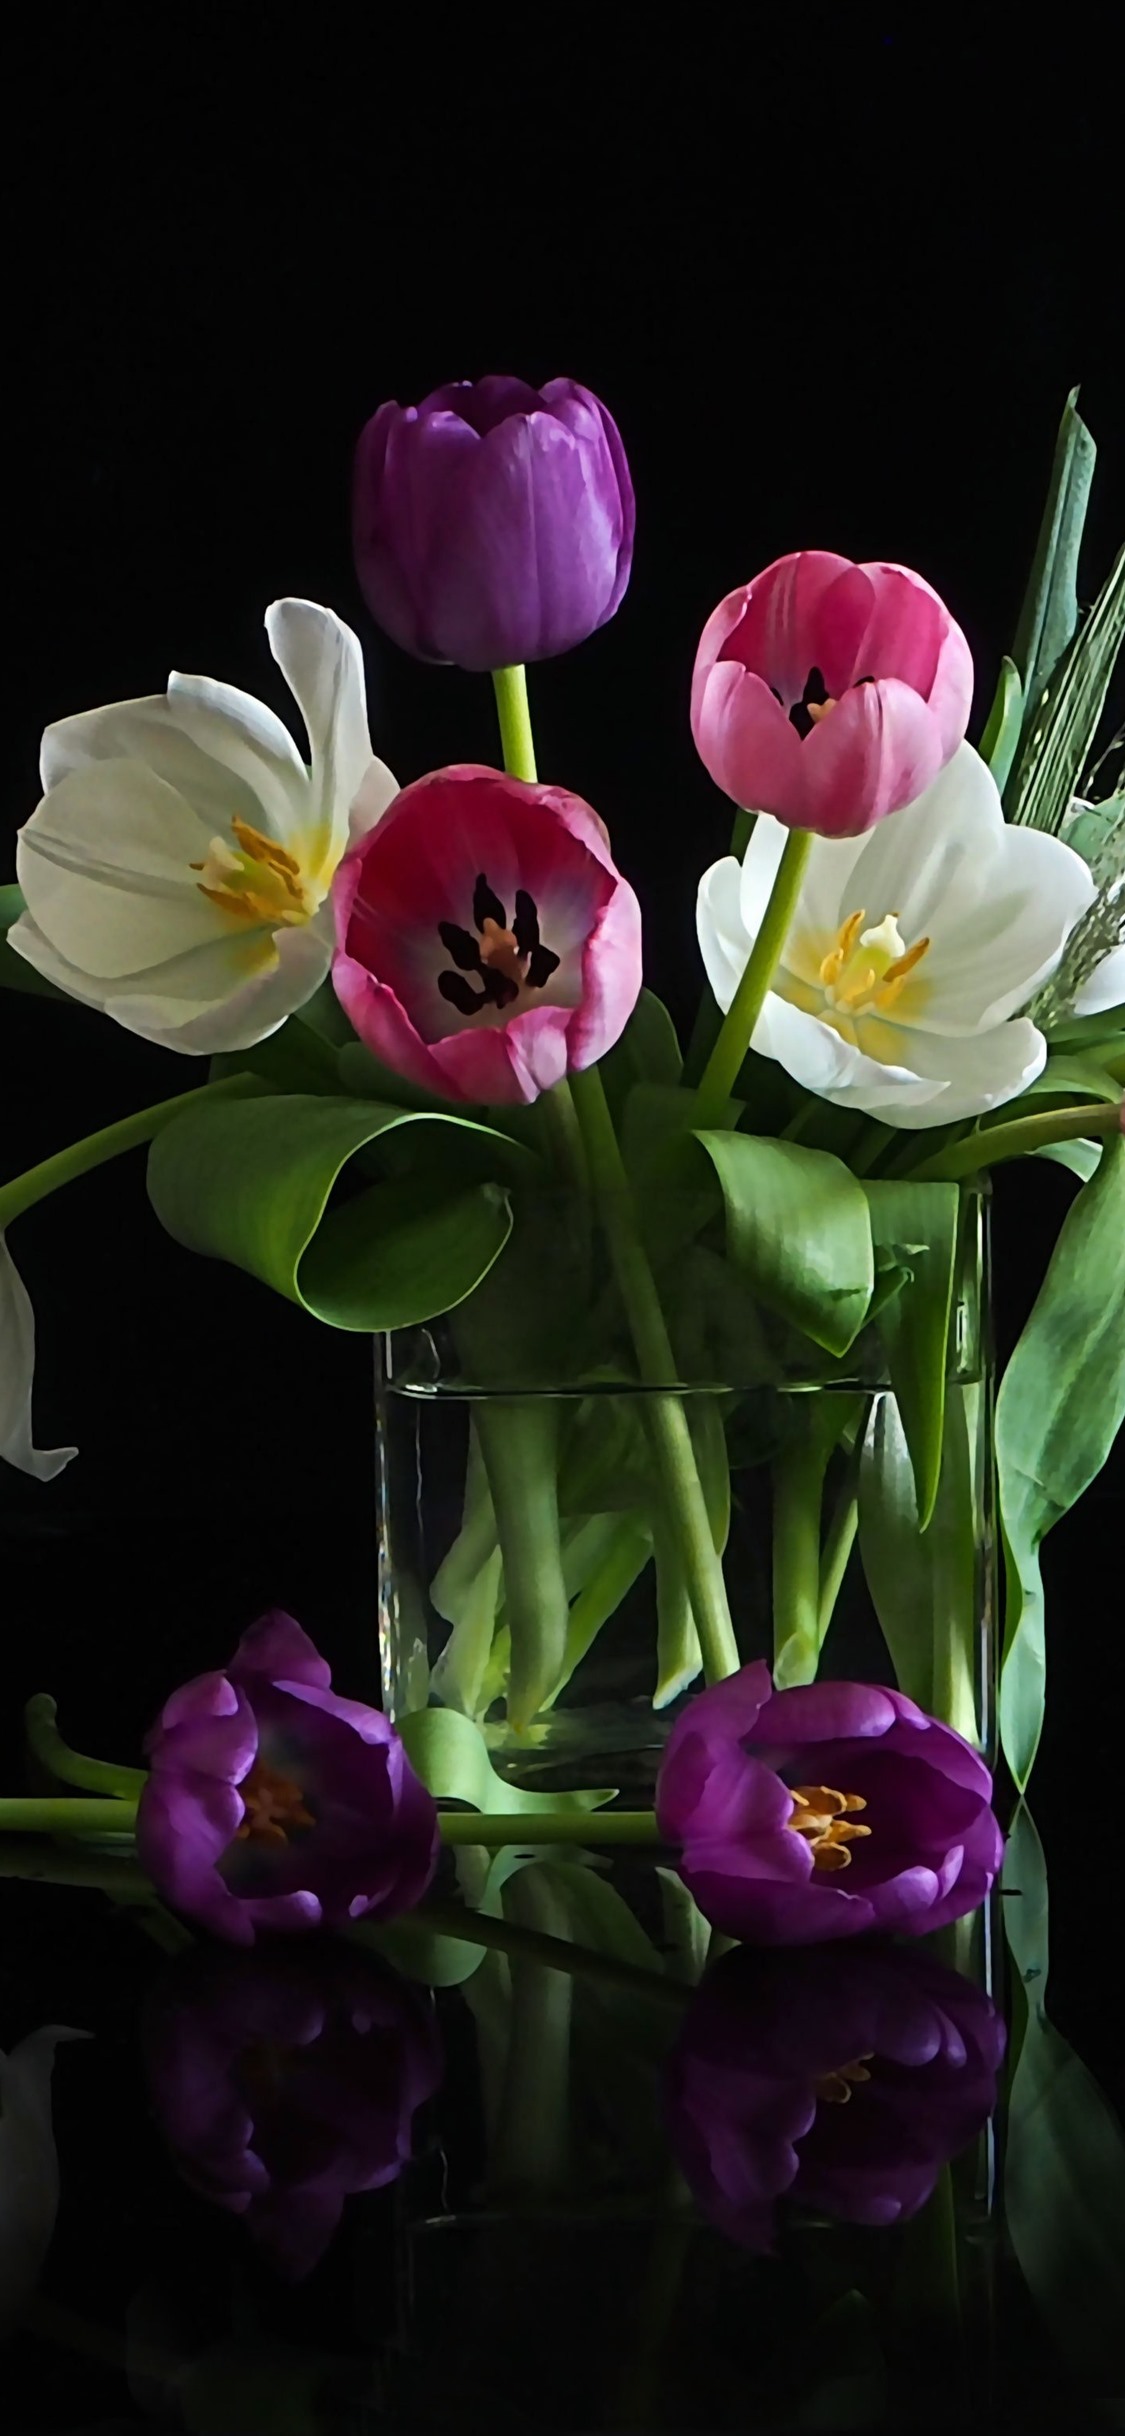 White, Pink Tulip Flowers, Black Background 1242x2688 IPhone 11 Pro XS Max Wallpaper, Background, Picture, Image